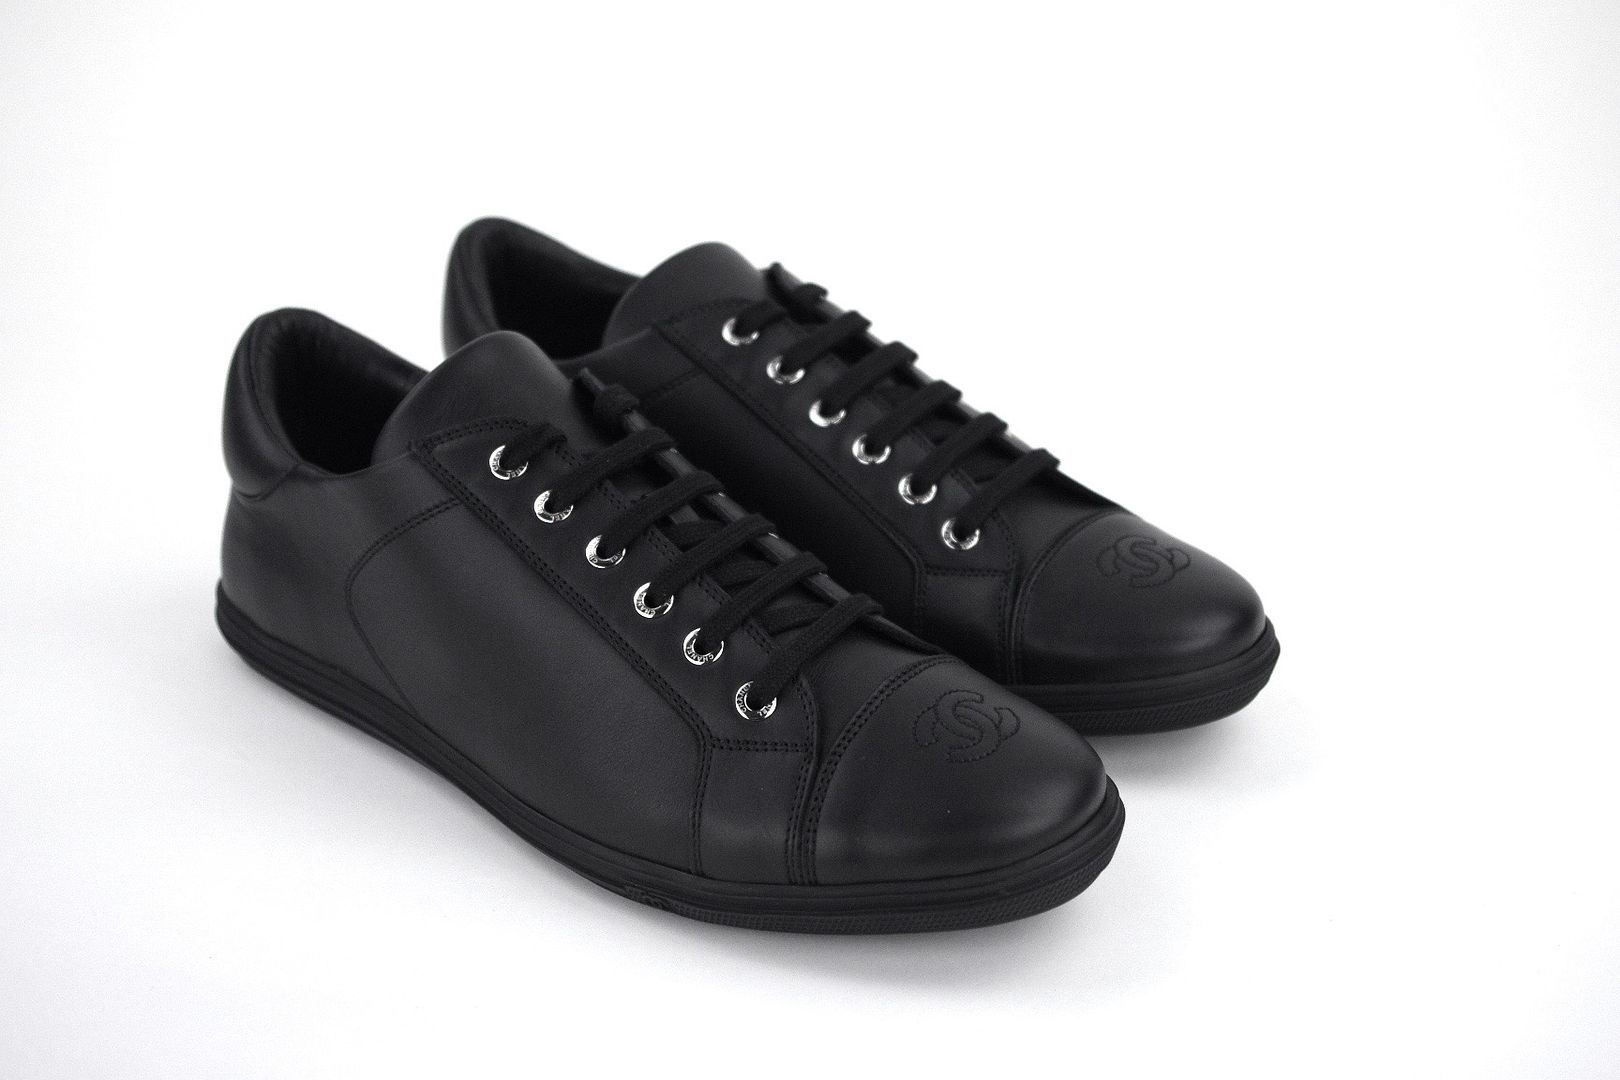 New CHANEL Men's Black Leather sneakers tennis shoes CC logo 42 9 Made ...